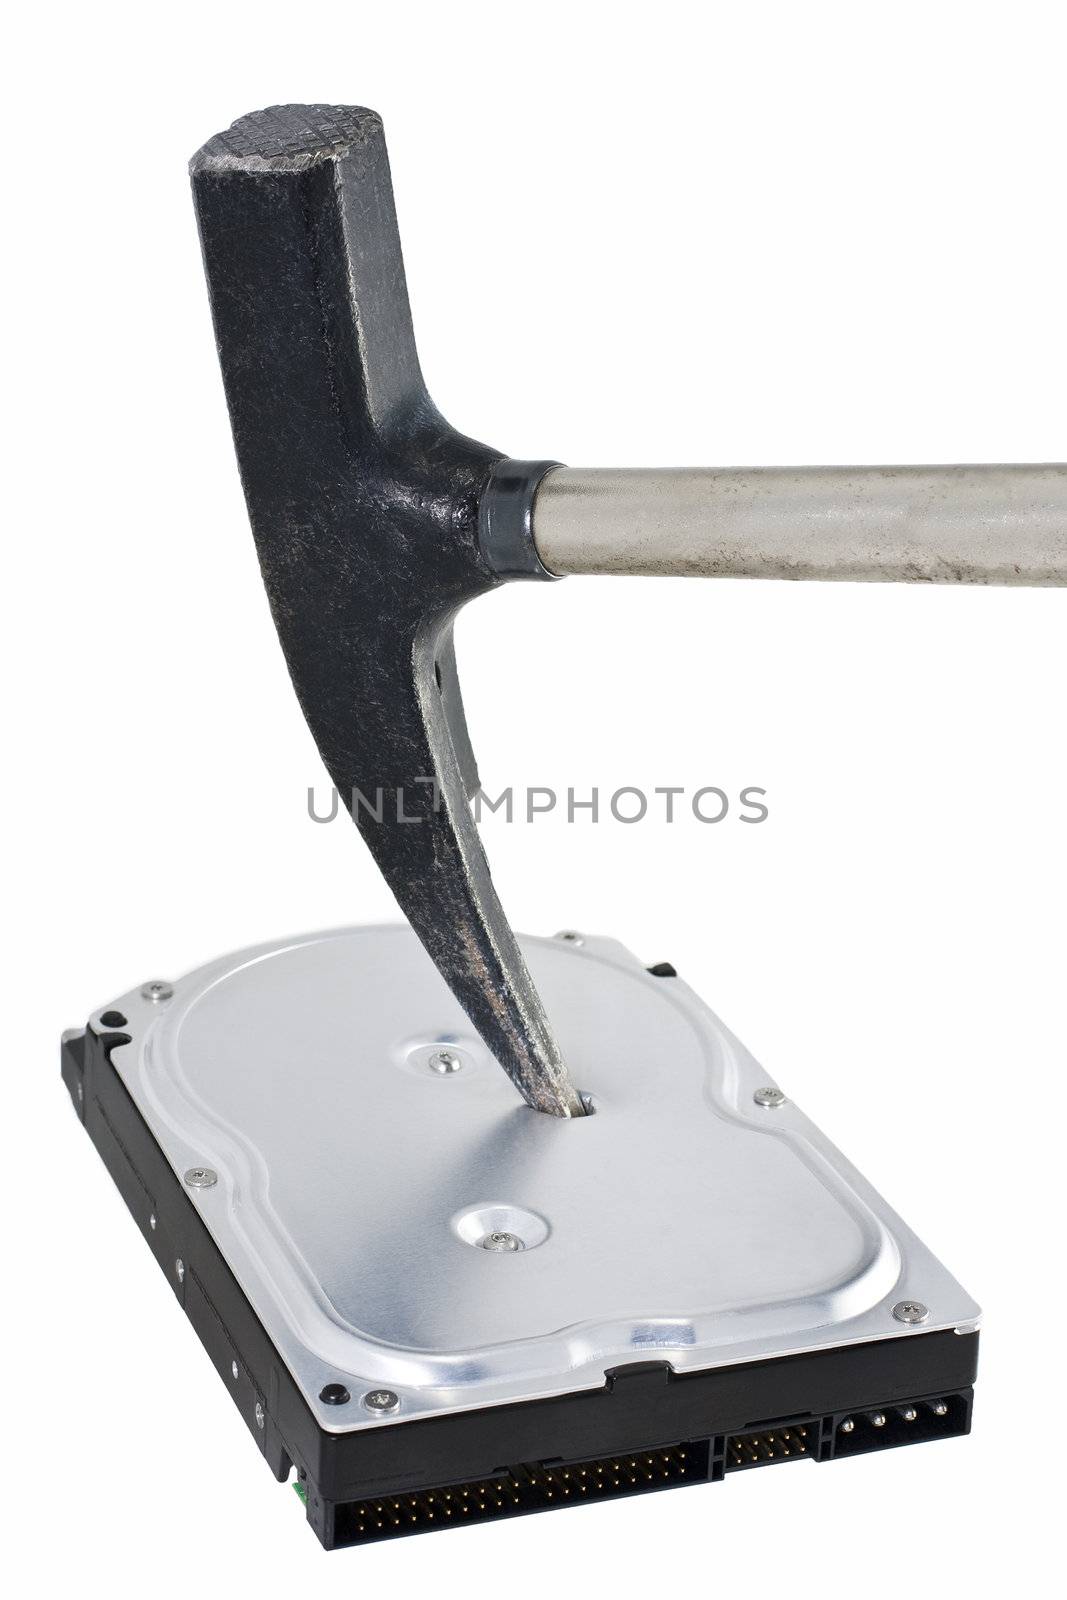 destroyed hard disk drive in white background. Someone used an hammer to "erase" the data